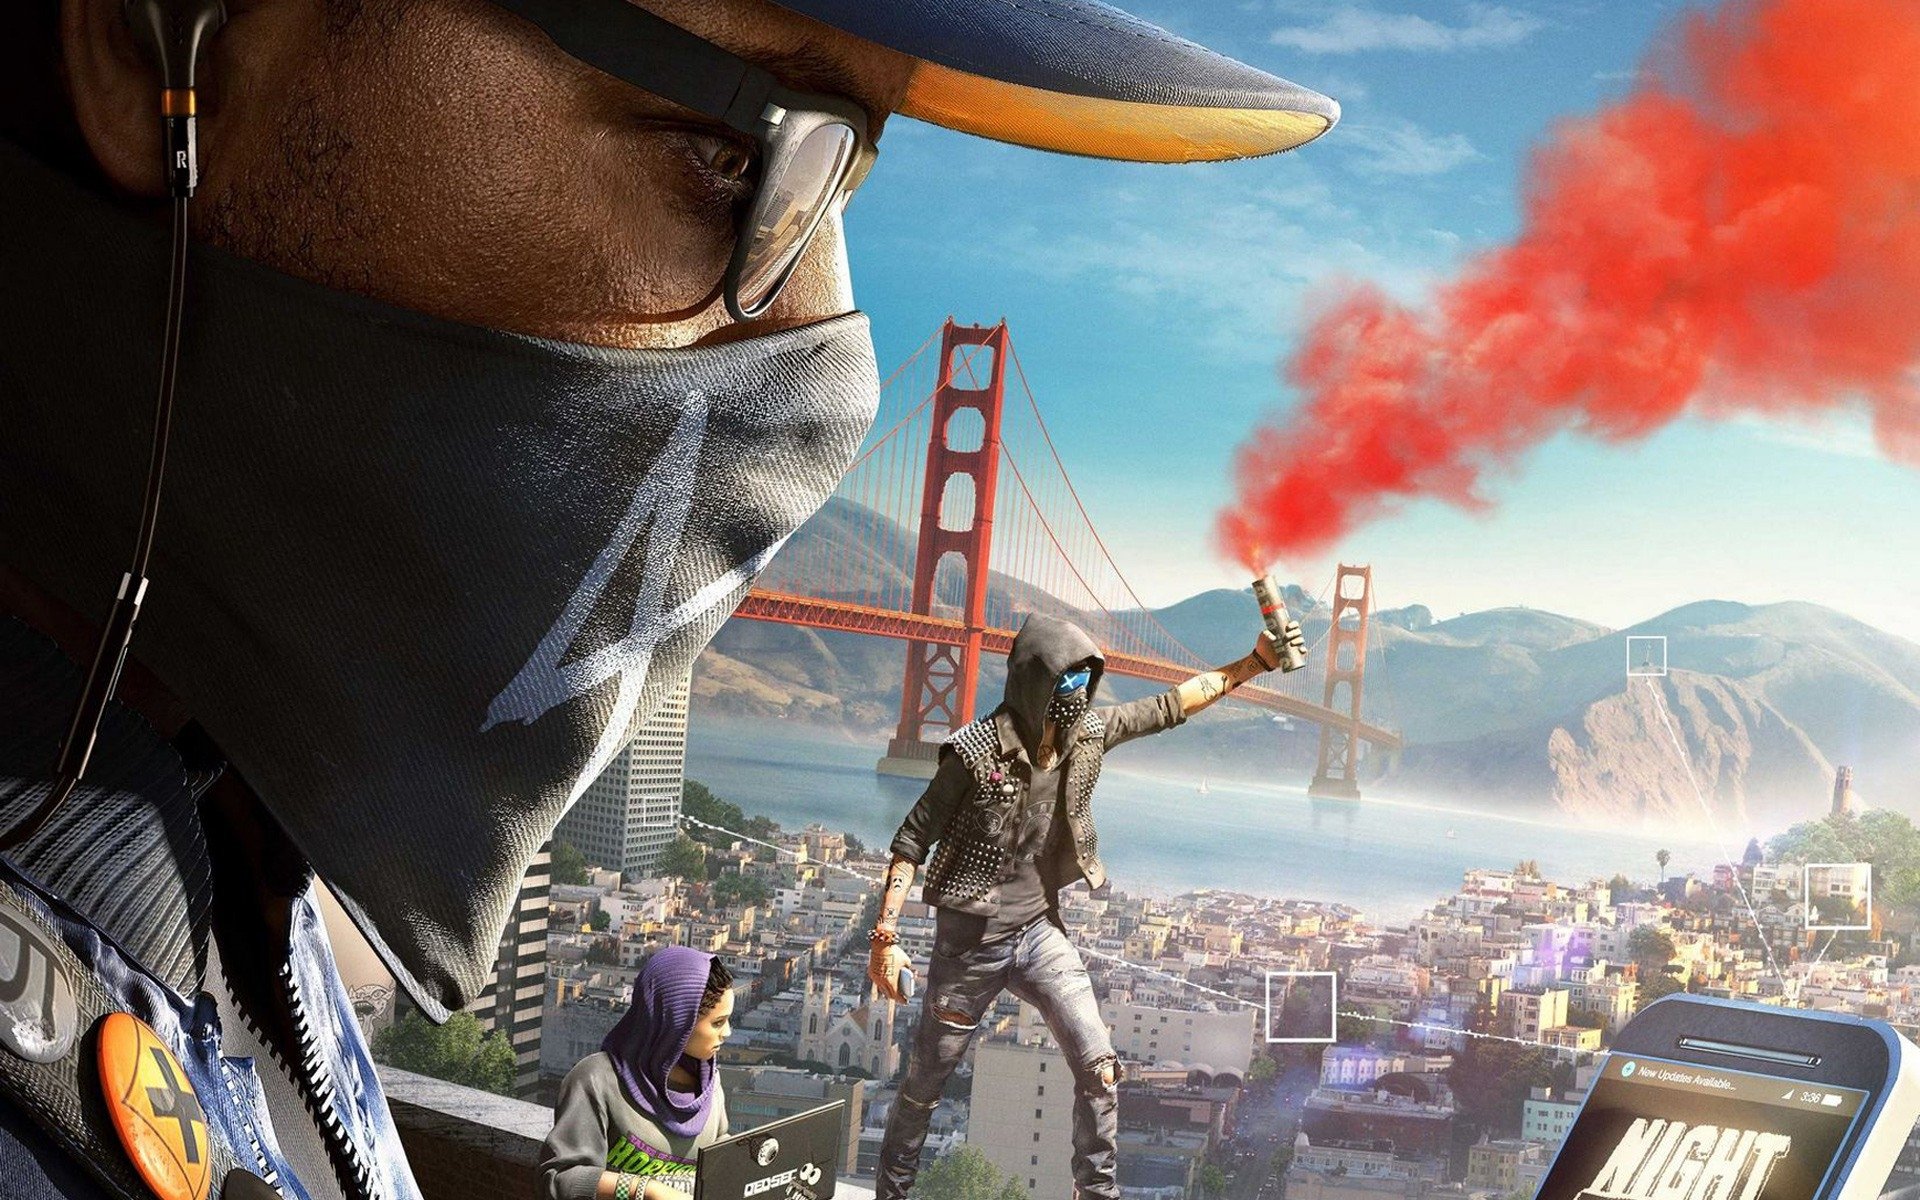 how to download watch dogs 2 on your iphone